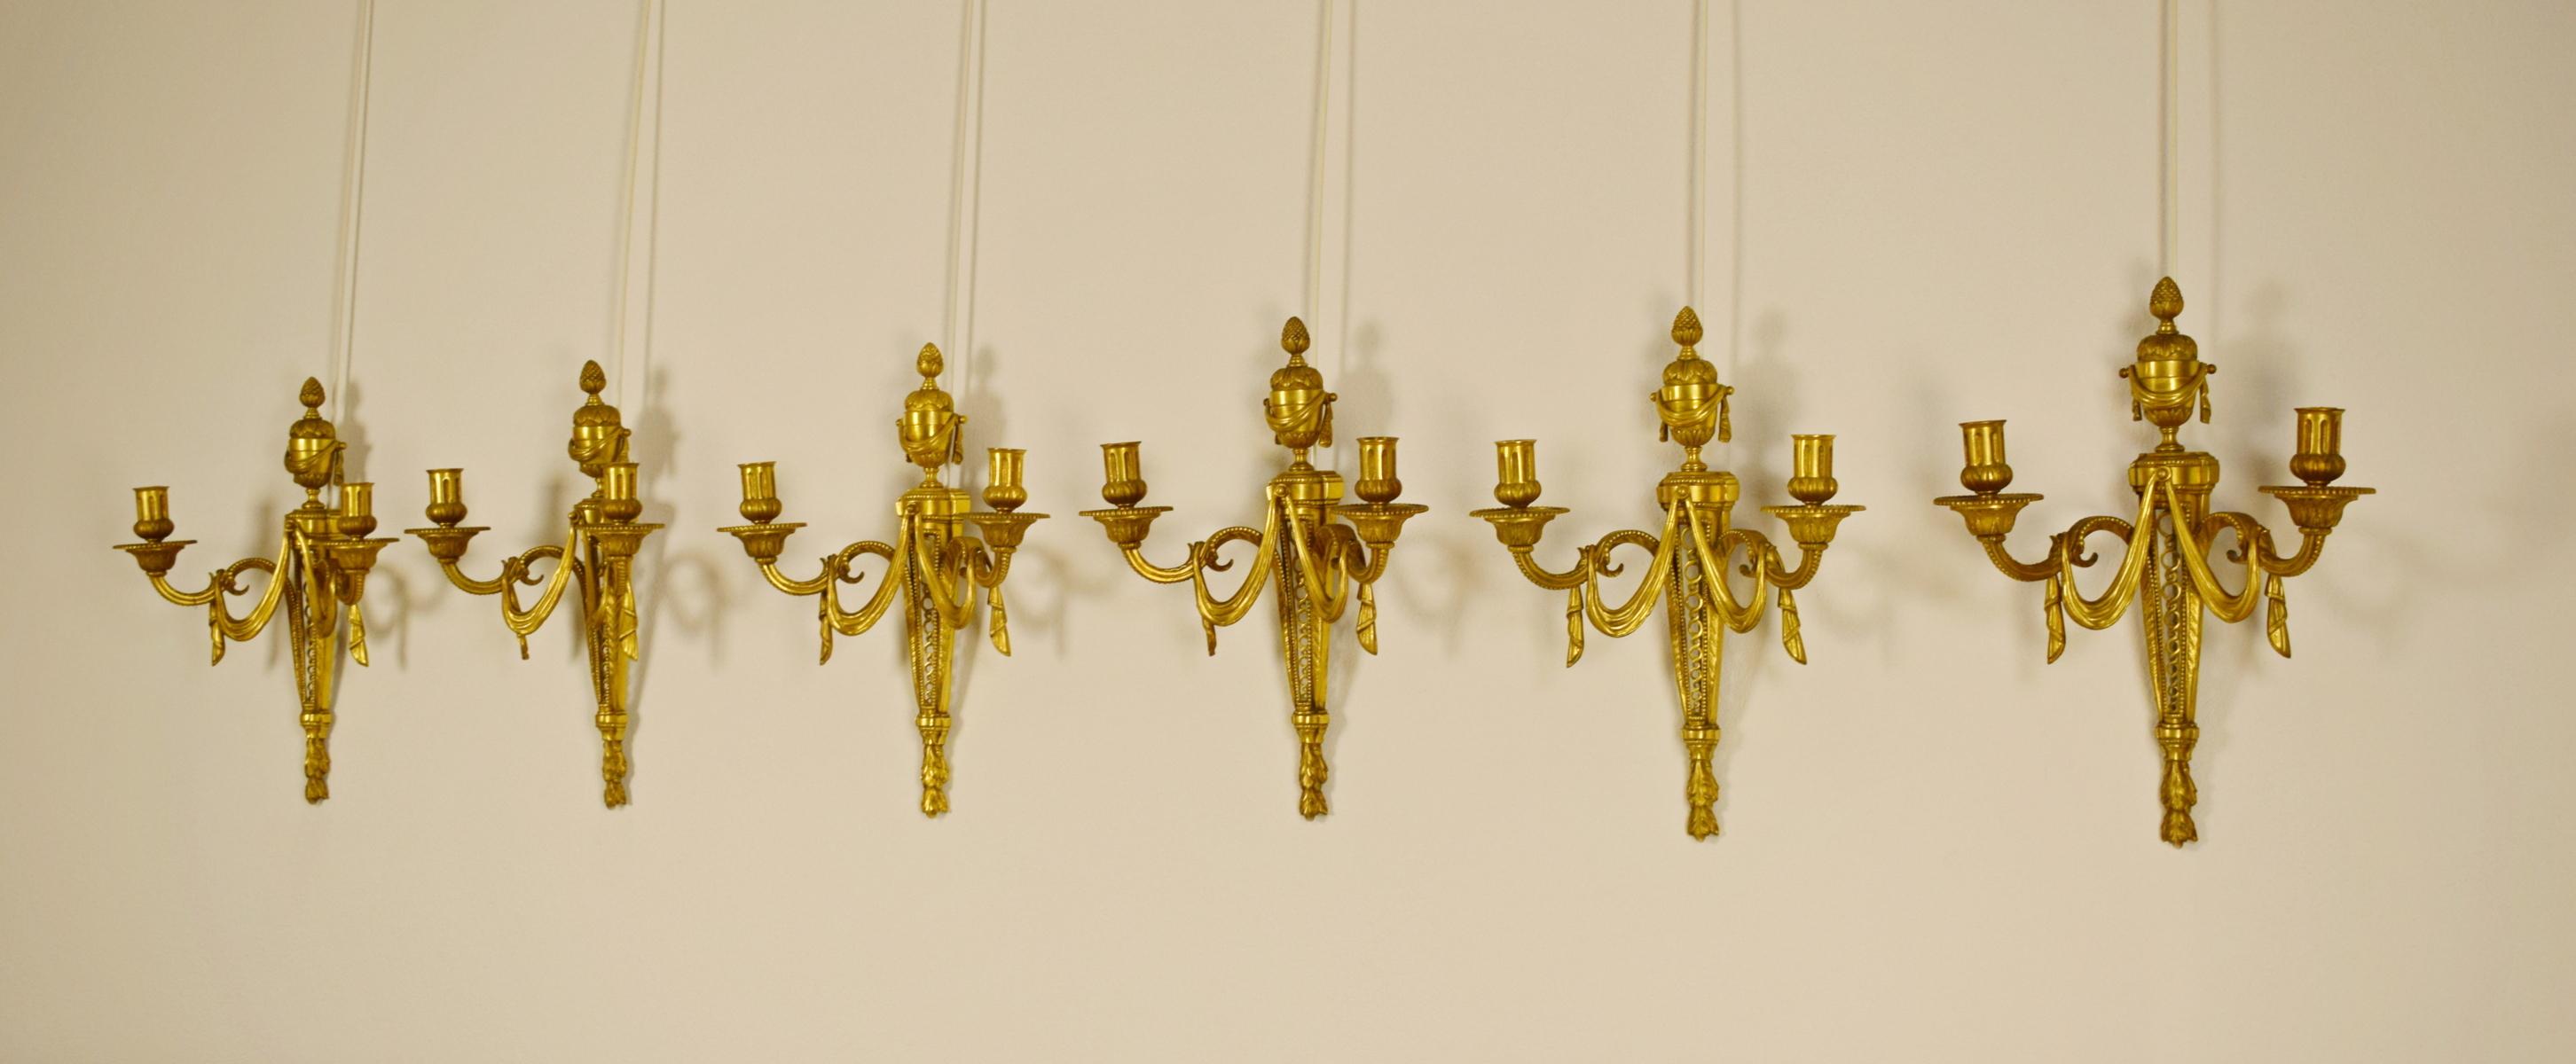 Set of 6 appliques finely chiseled and gilded bronze, France early 19th century Louis XVI style.